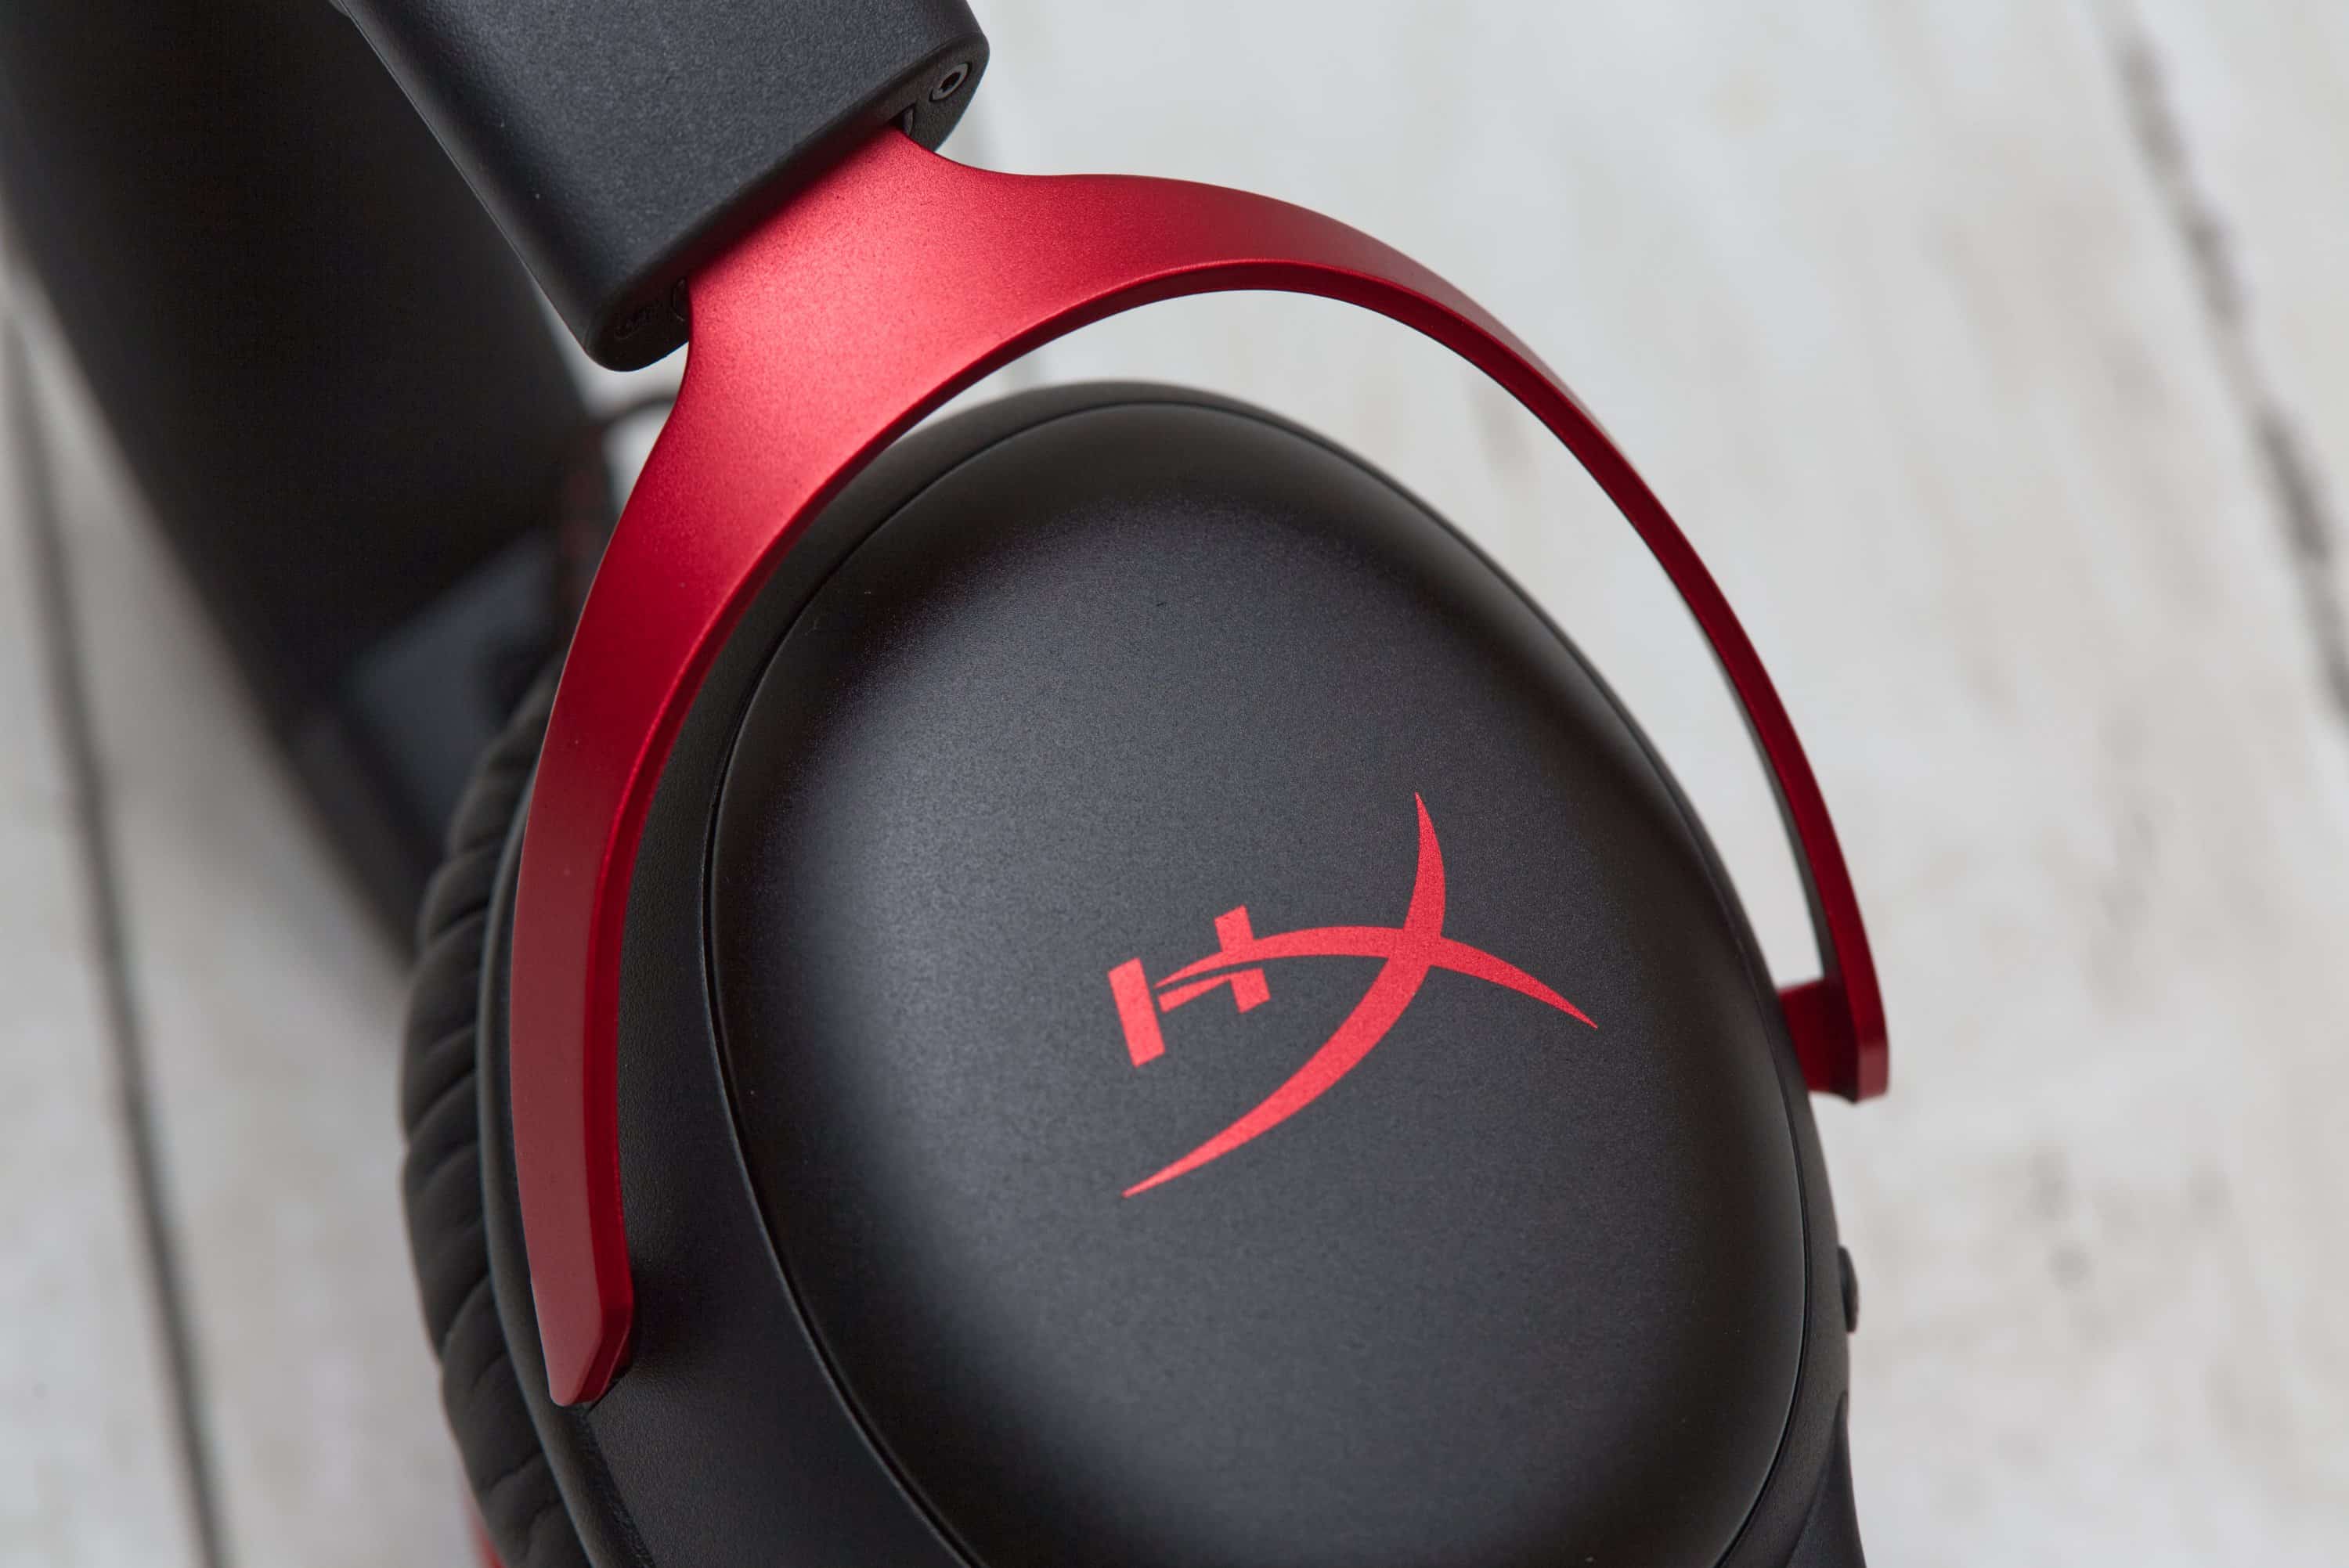 HyperX headsets III generation the gaming next - review Cloud of